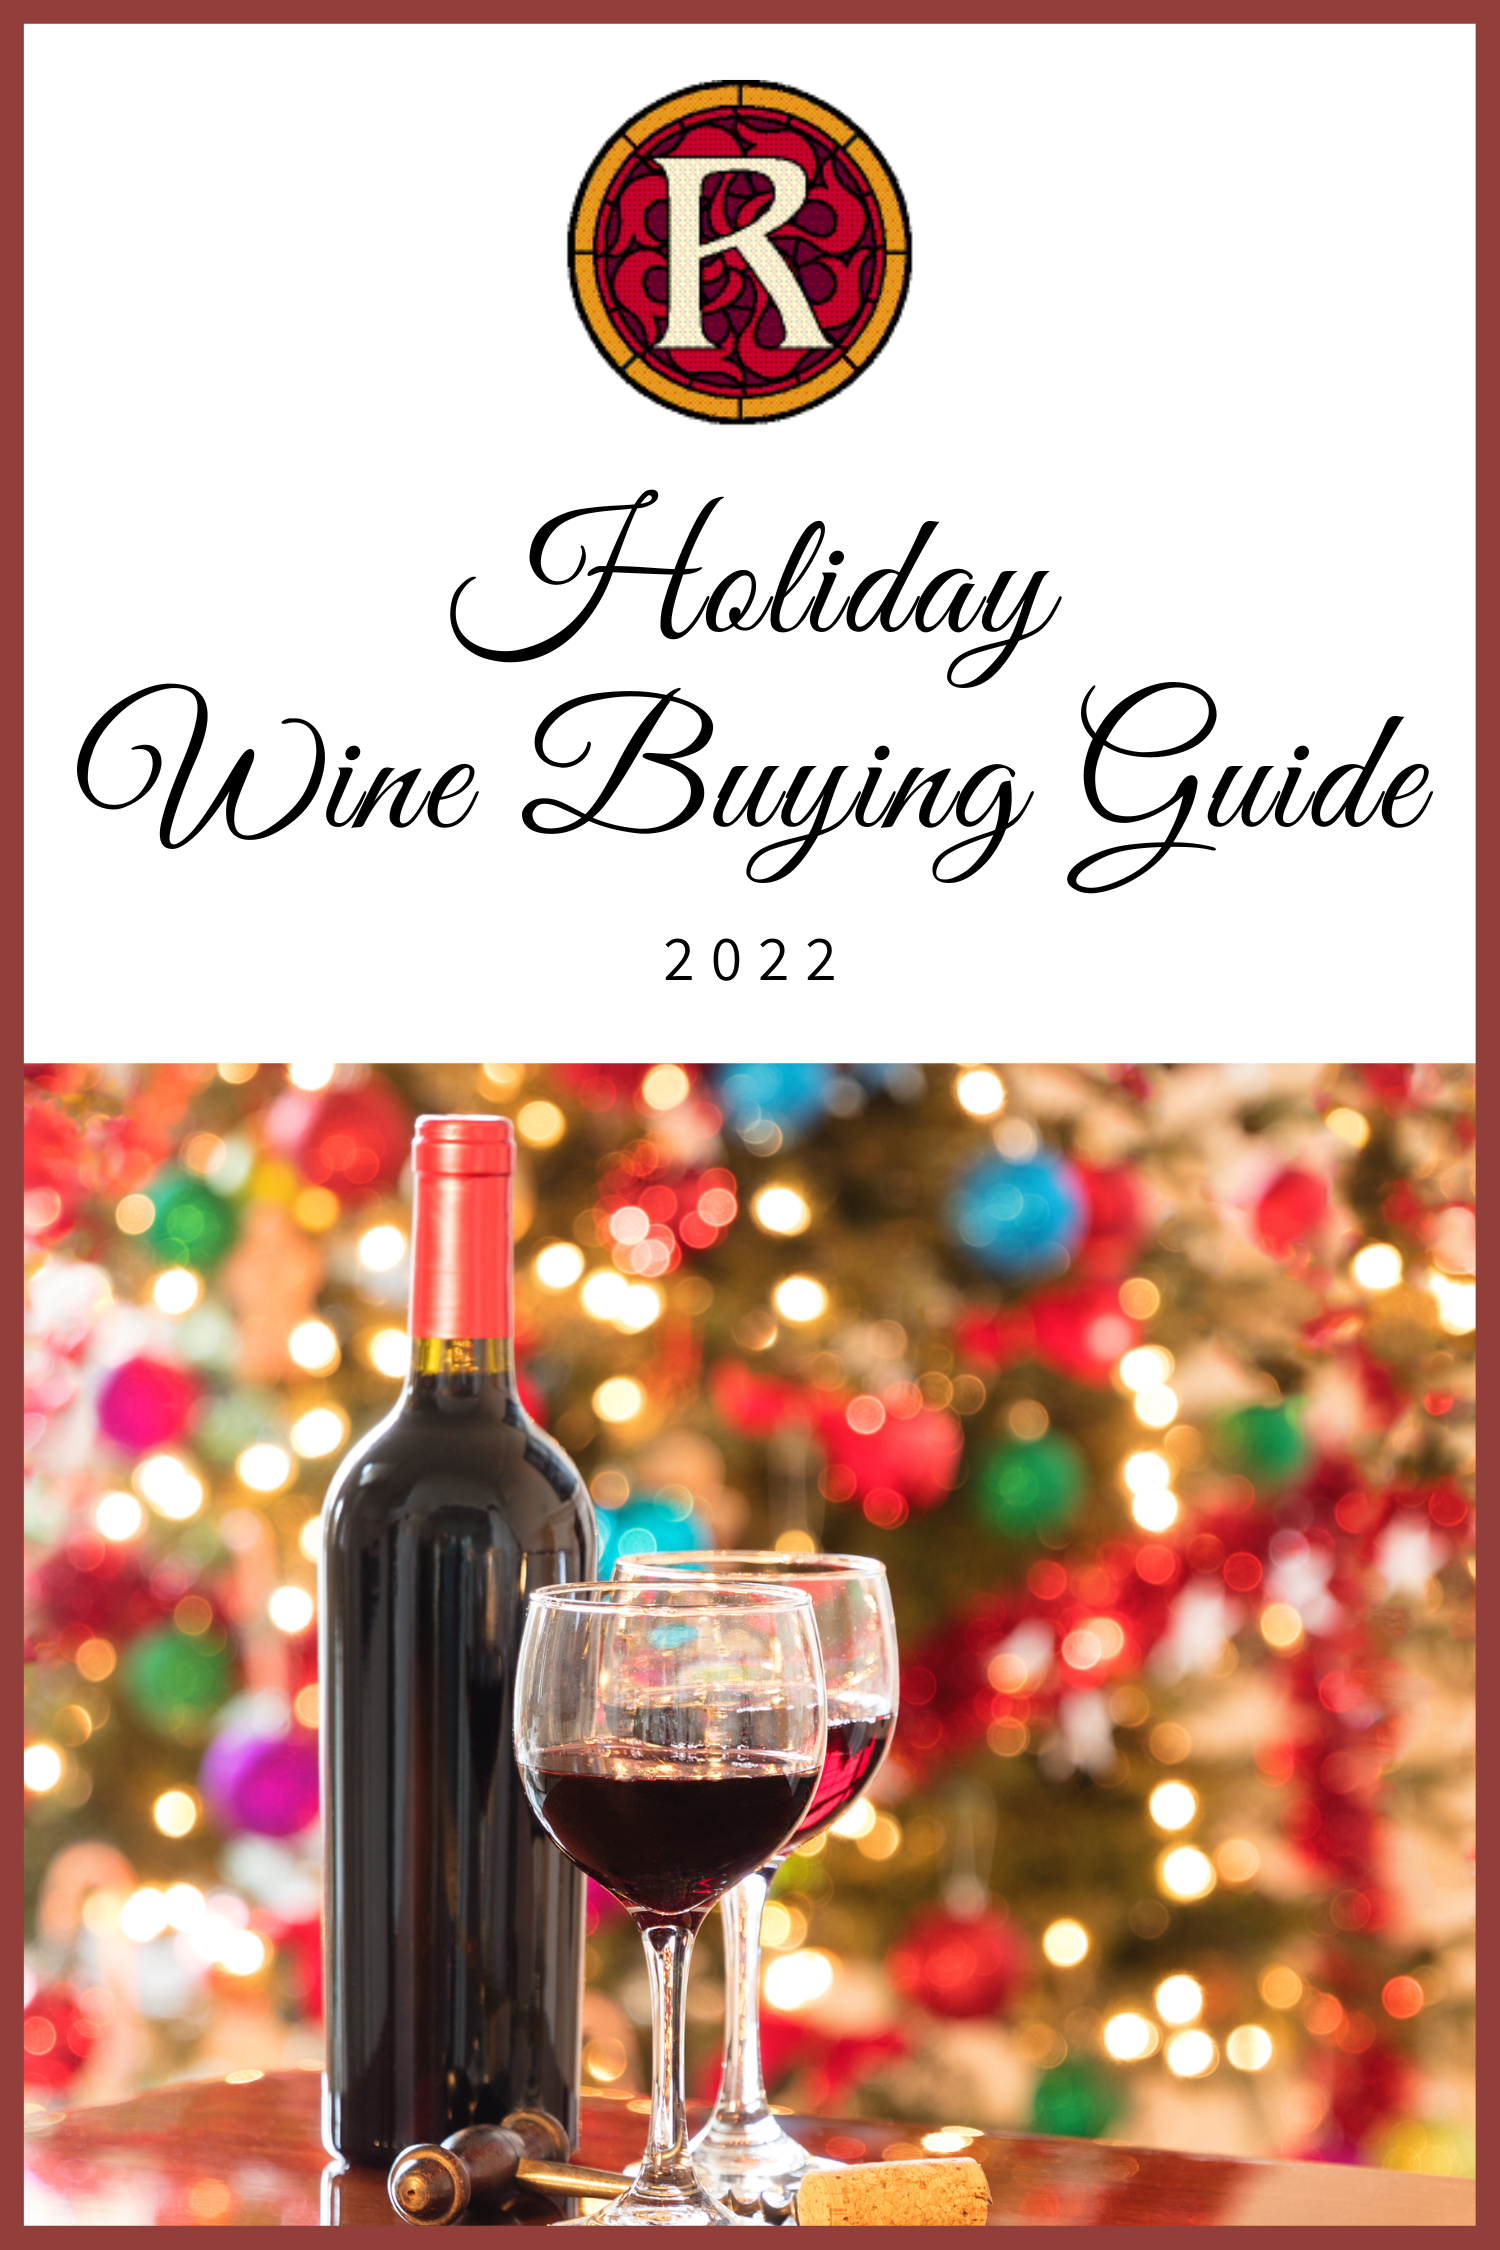 Wine Buying Guide Cover